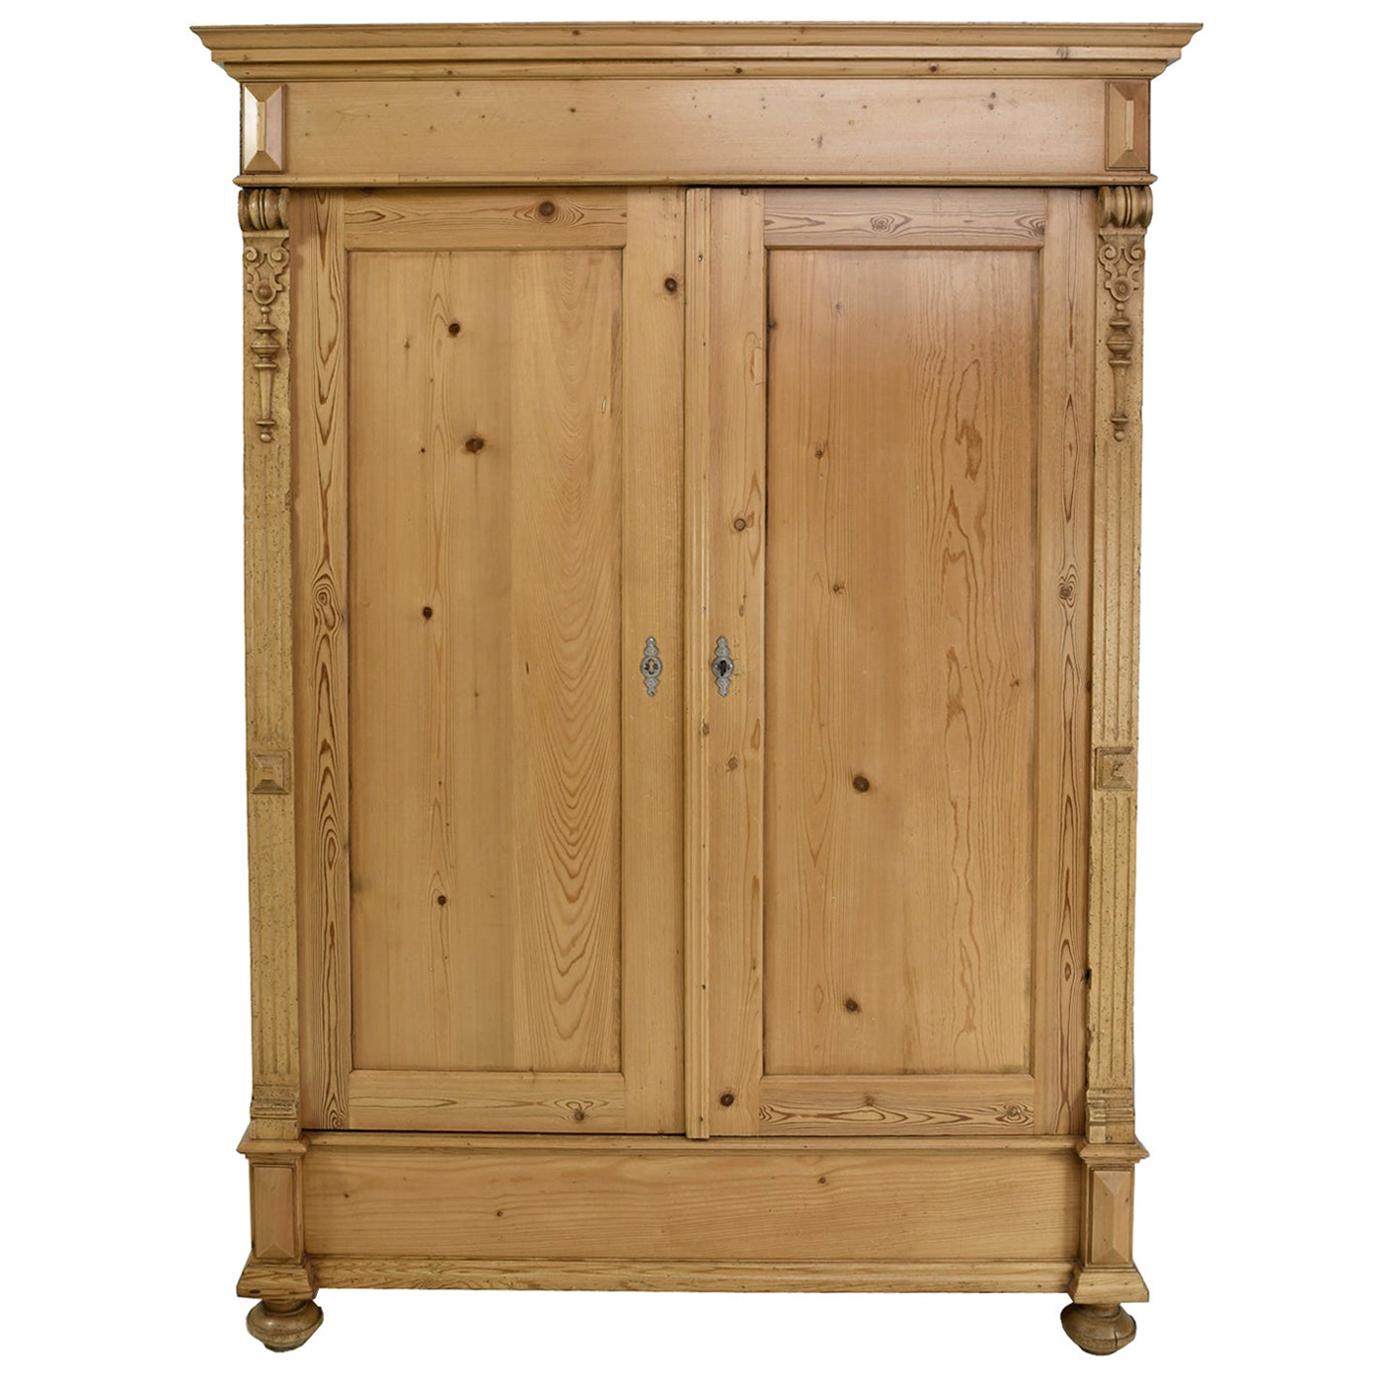 This German Grunderzeit pine armoire has all of it original appliques, turned bun feet. Nickel-plated key plates and working lock with key. The inside comes with a hanging bar and 3 adjustable shelves. It is the perfect depth for hanging cloths or